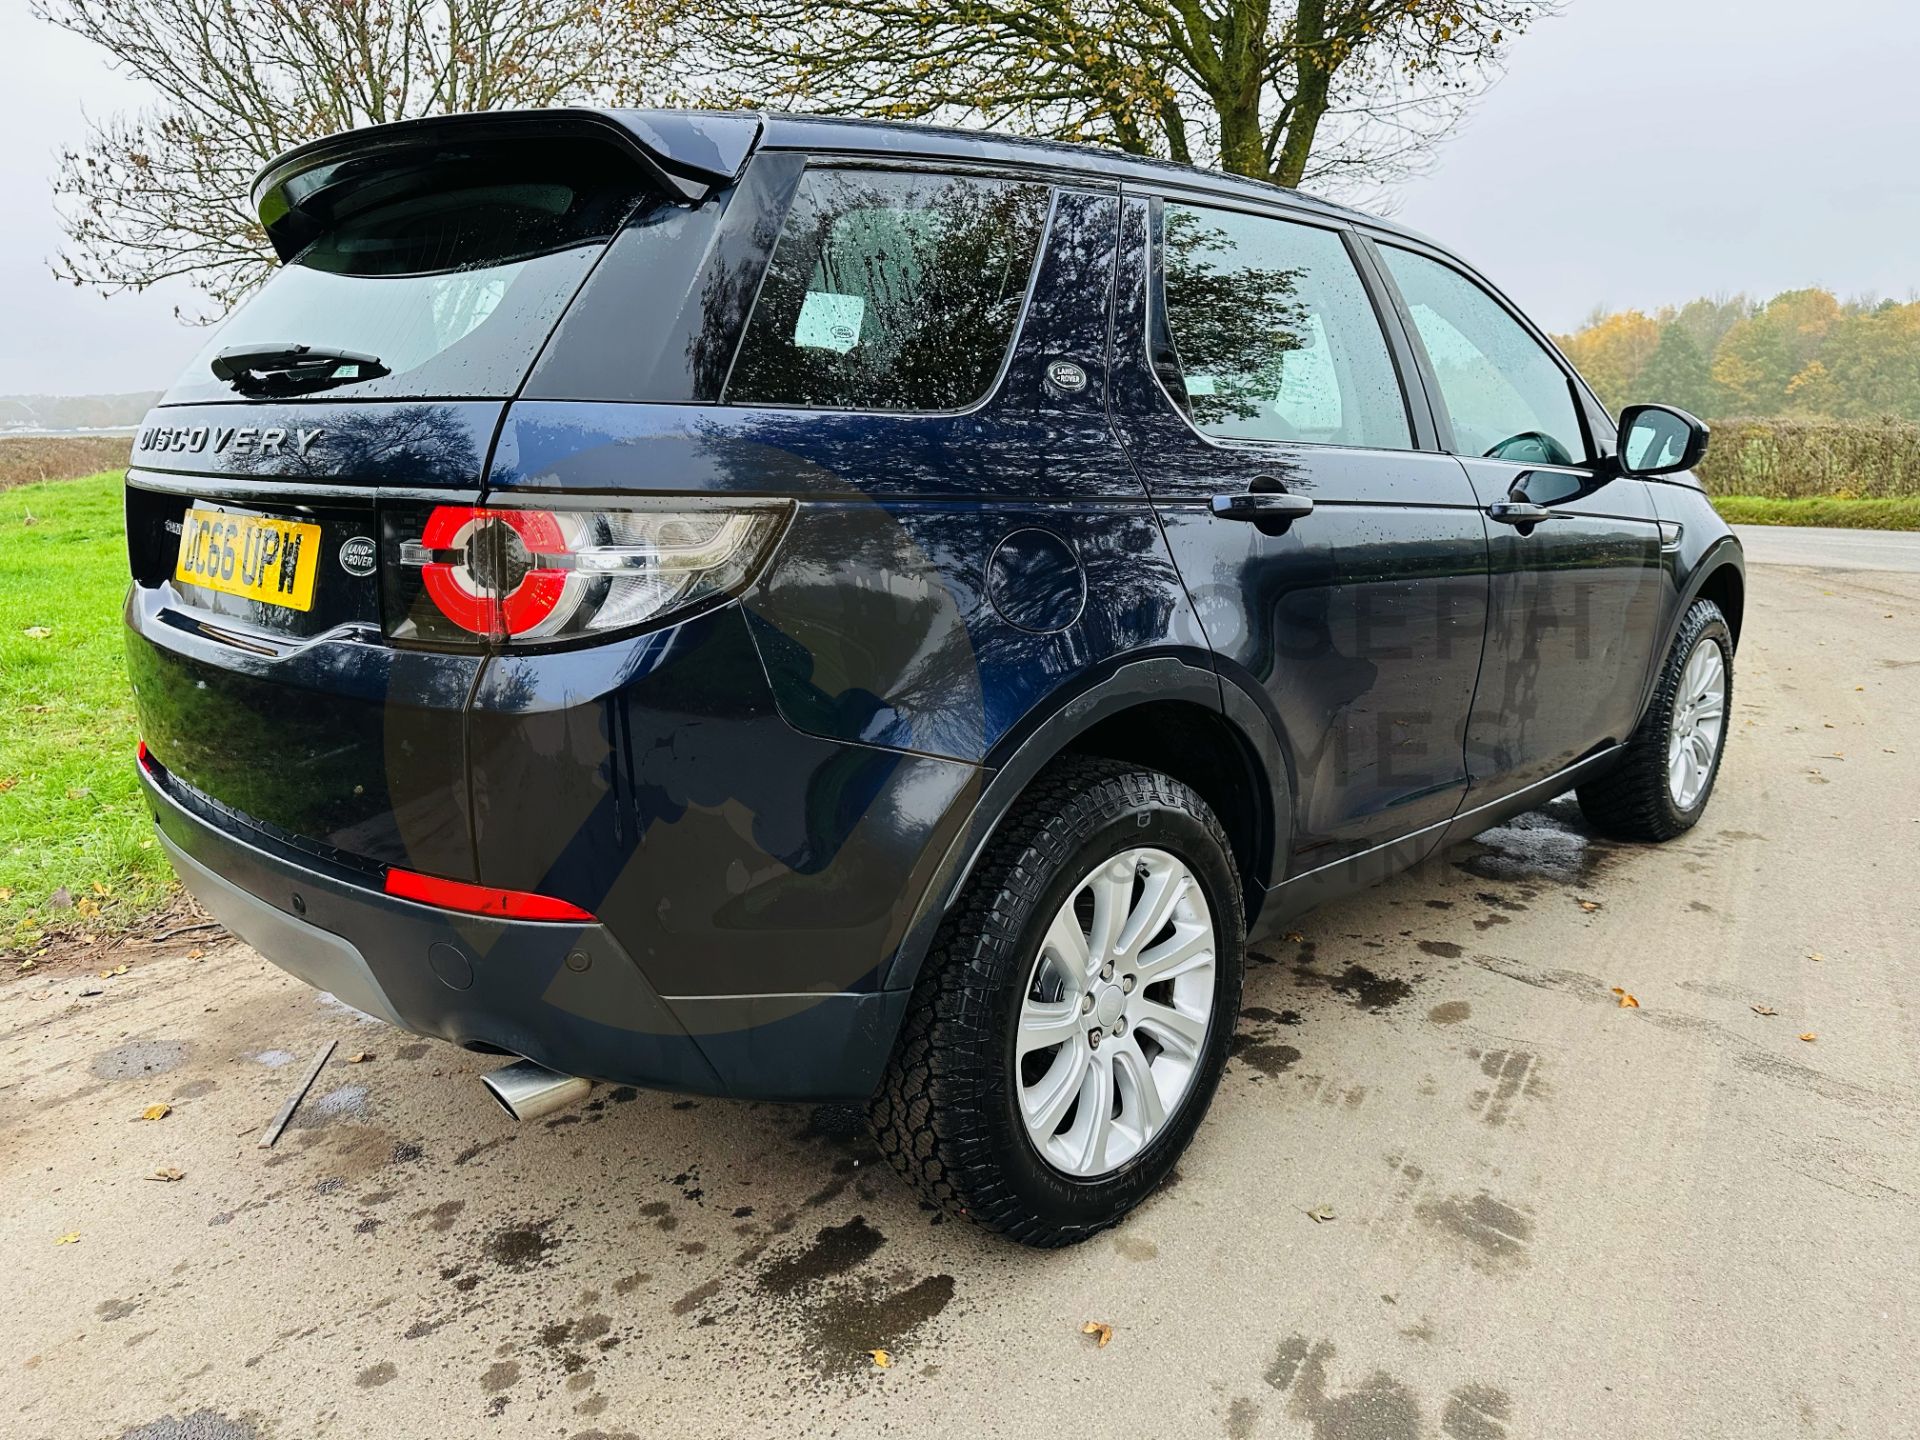 (ON SALE) LAND ROVER DISCOVERY SPORT *SE TECH* 2017 MODEL - FULL SERVICE HISTORY -1 OWNER - NO VAT!! - Image 14 of 43